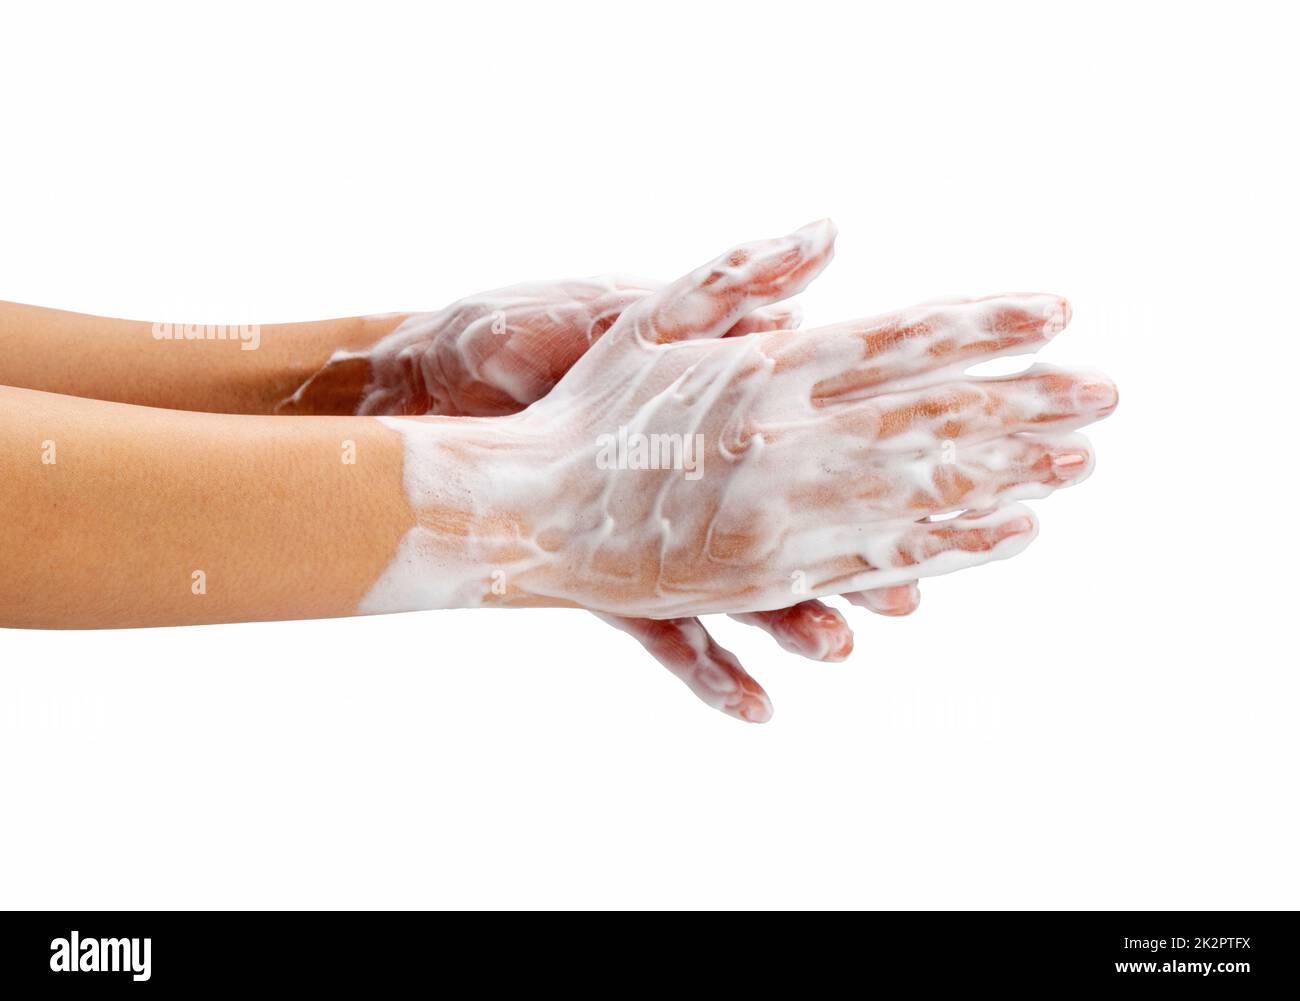 Female hand washing hands with soap lather on white background. Stock Photo